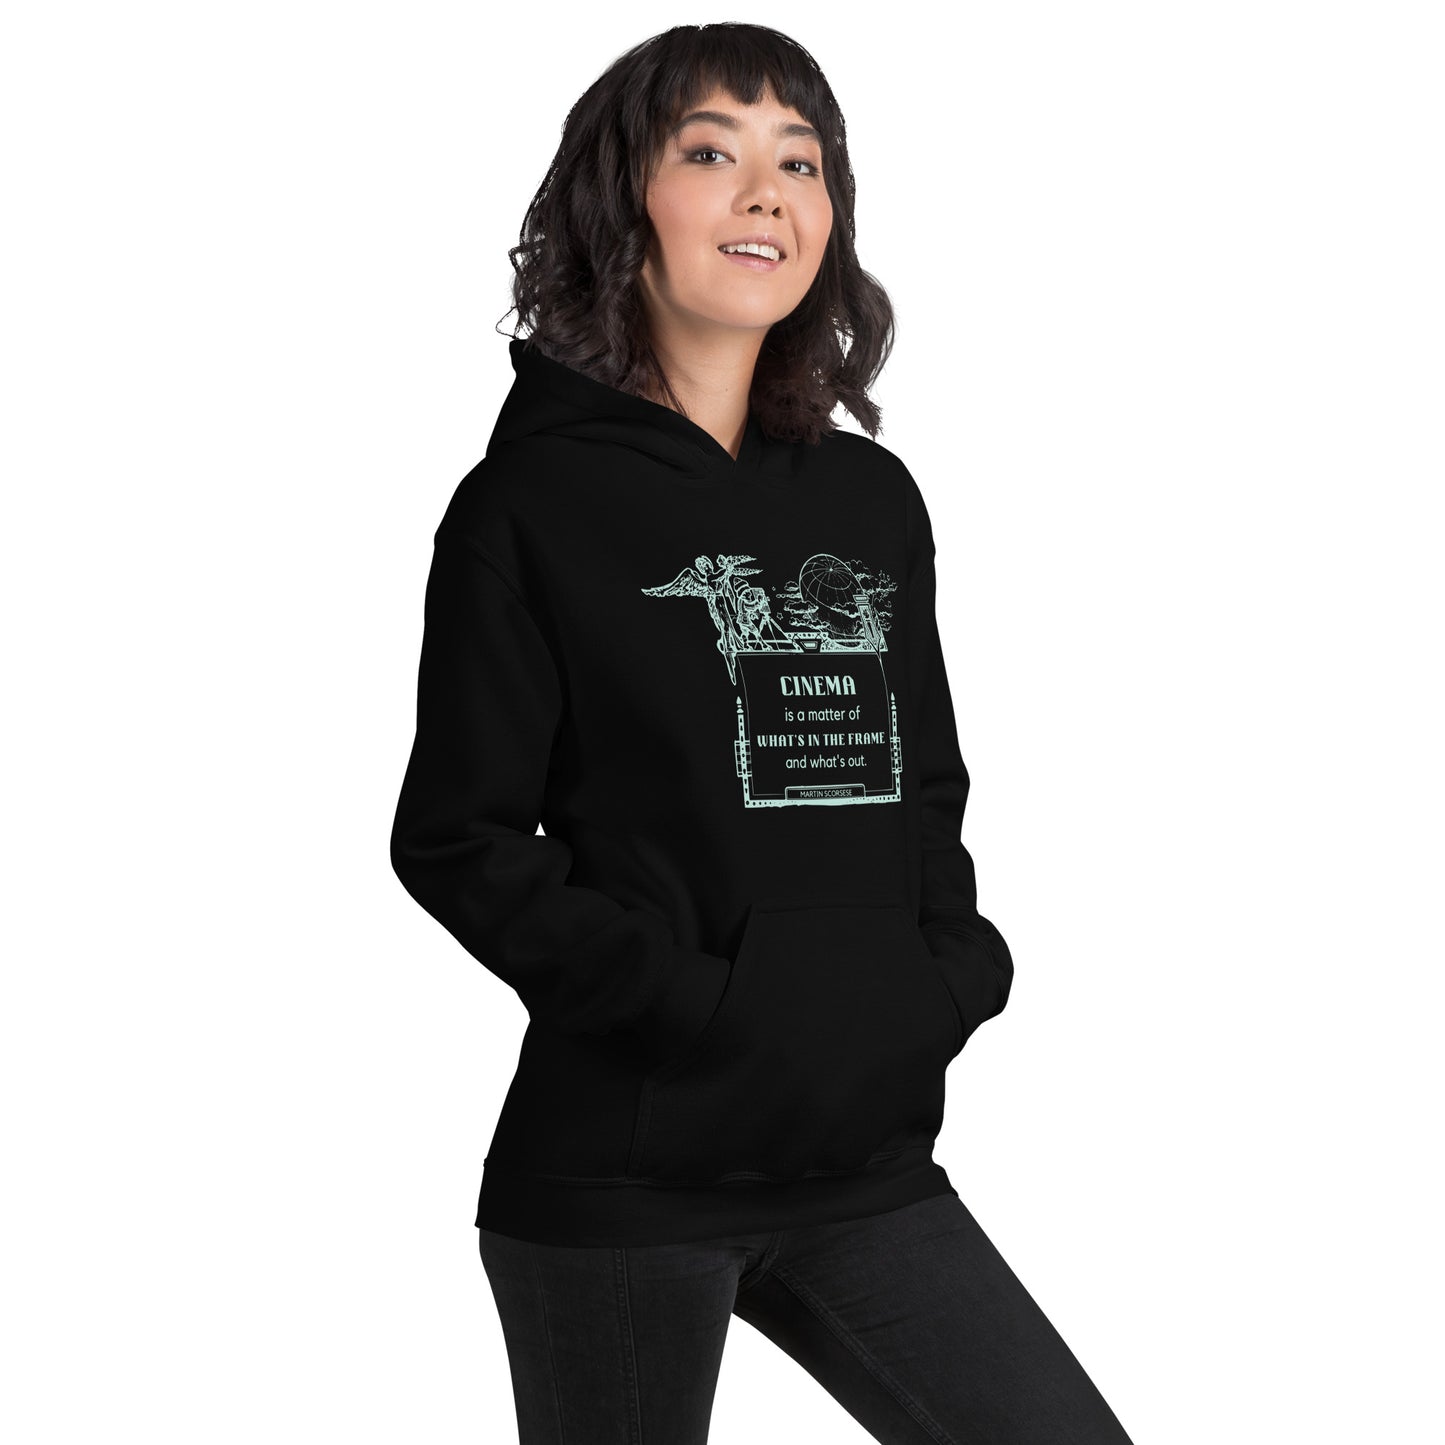 Cinema is a Matter of What's in the Frame and What's Out Unisex Hoodie, Cinema Quote